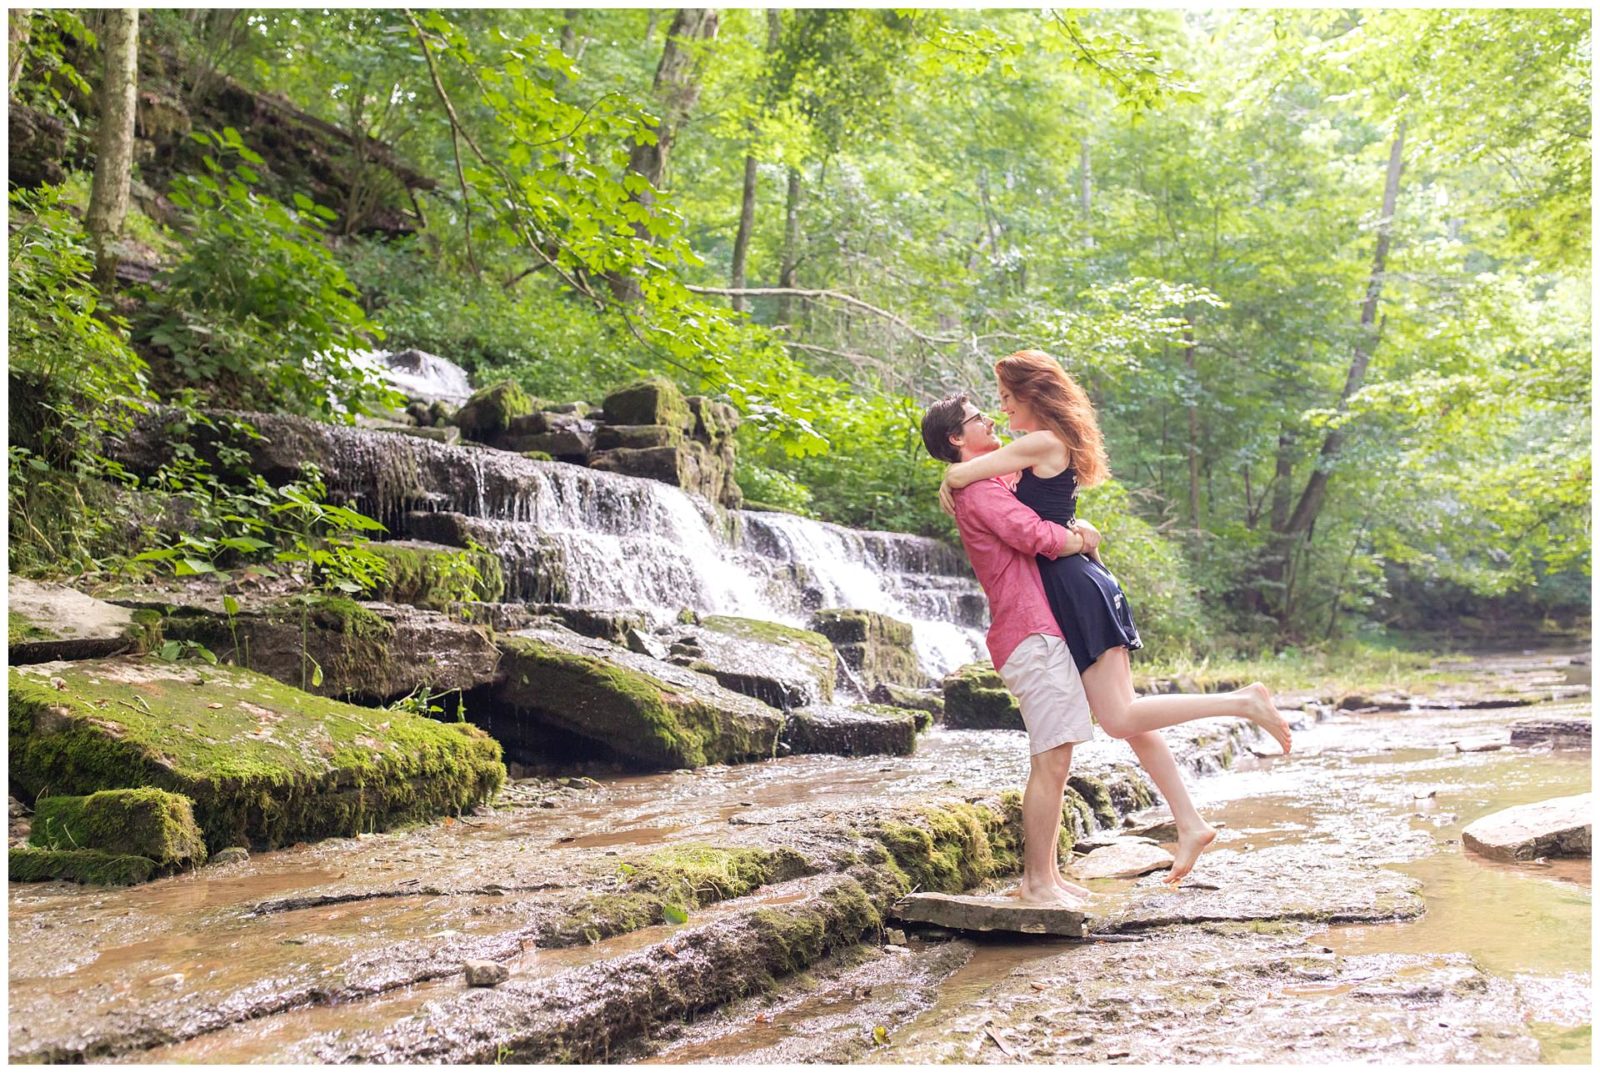 Couple by a waterfall at Shaker Village in Harrodsburg, KY